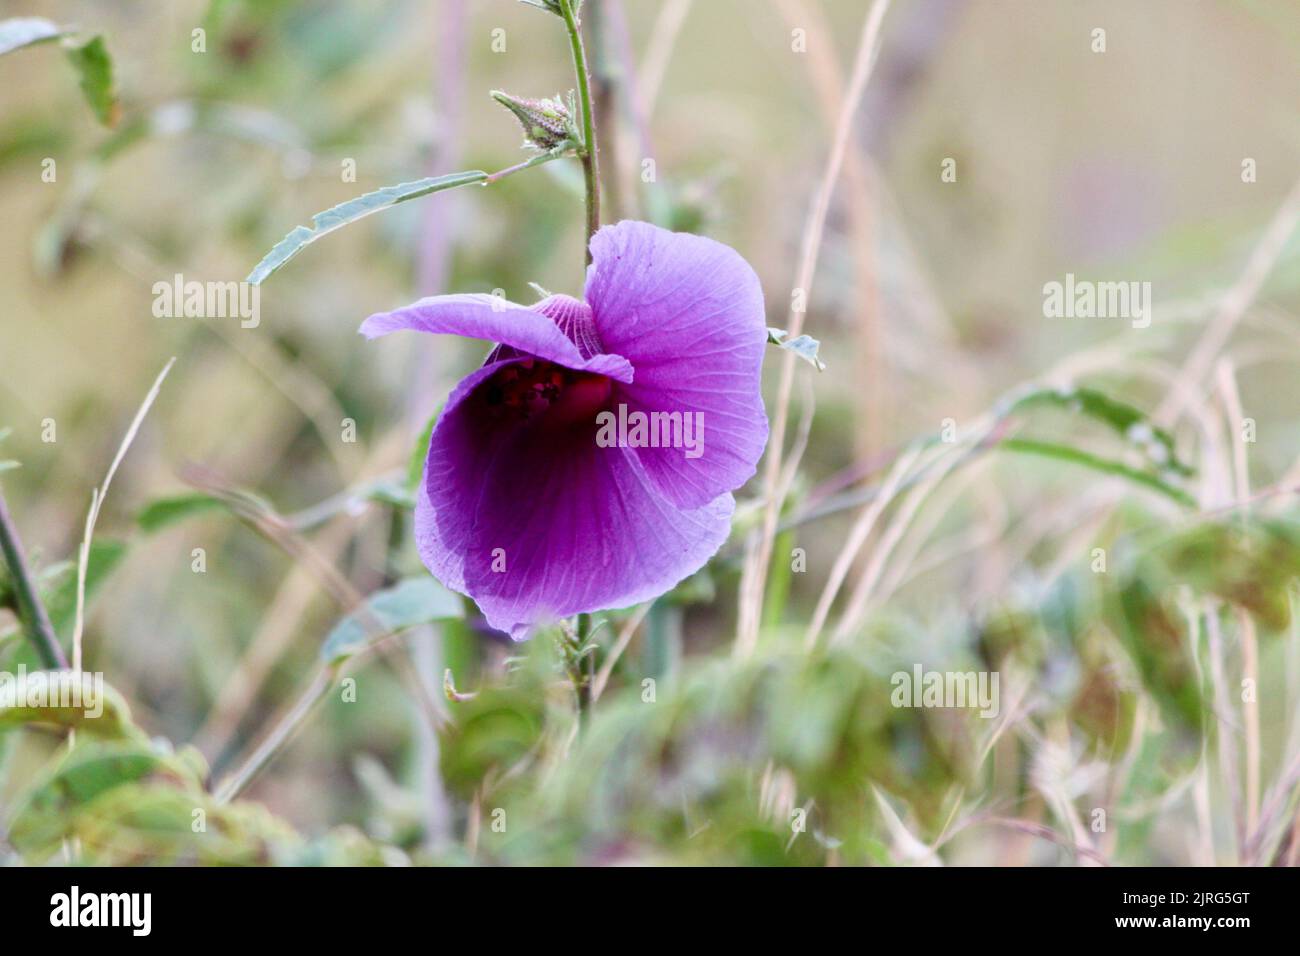 The close-up view of a Gossypium sturtianum flower bulb with purple petals Stock Photo